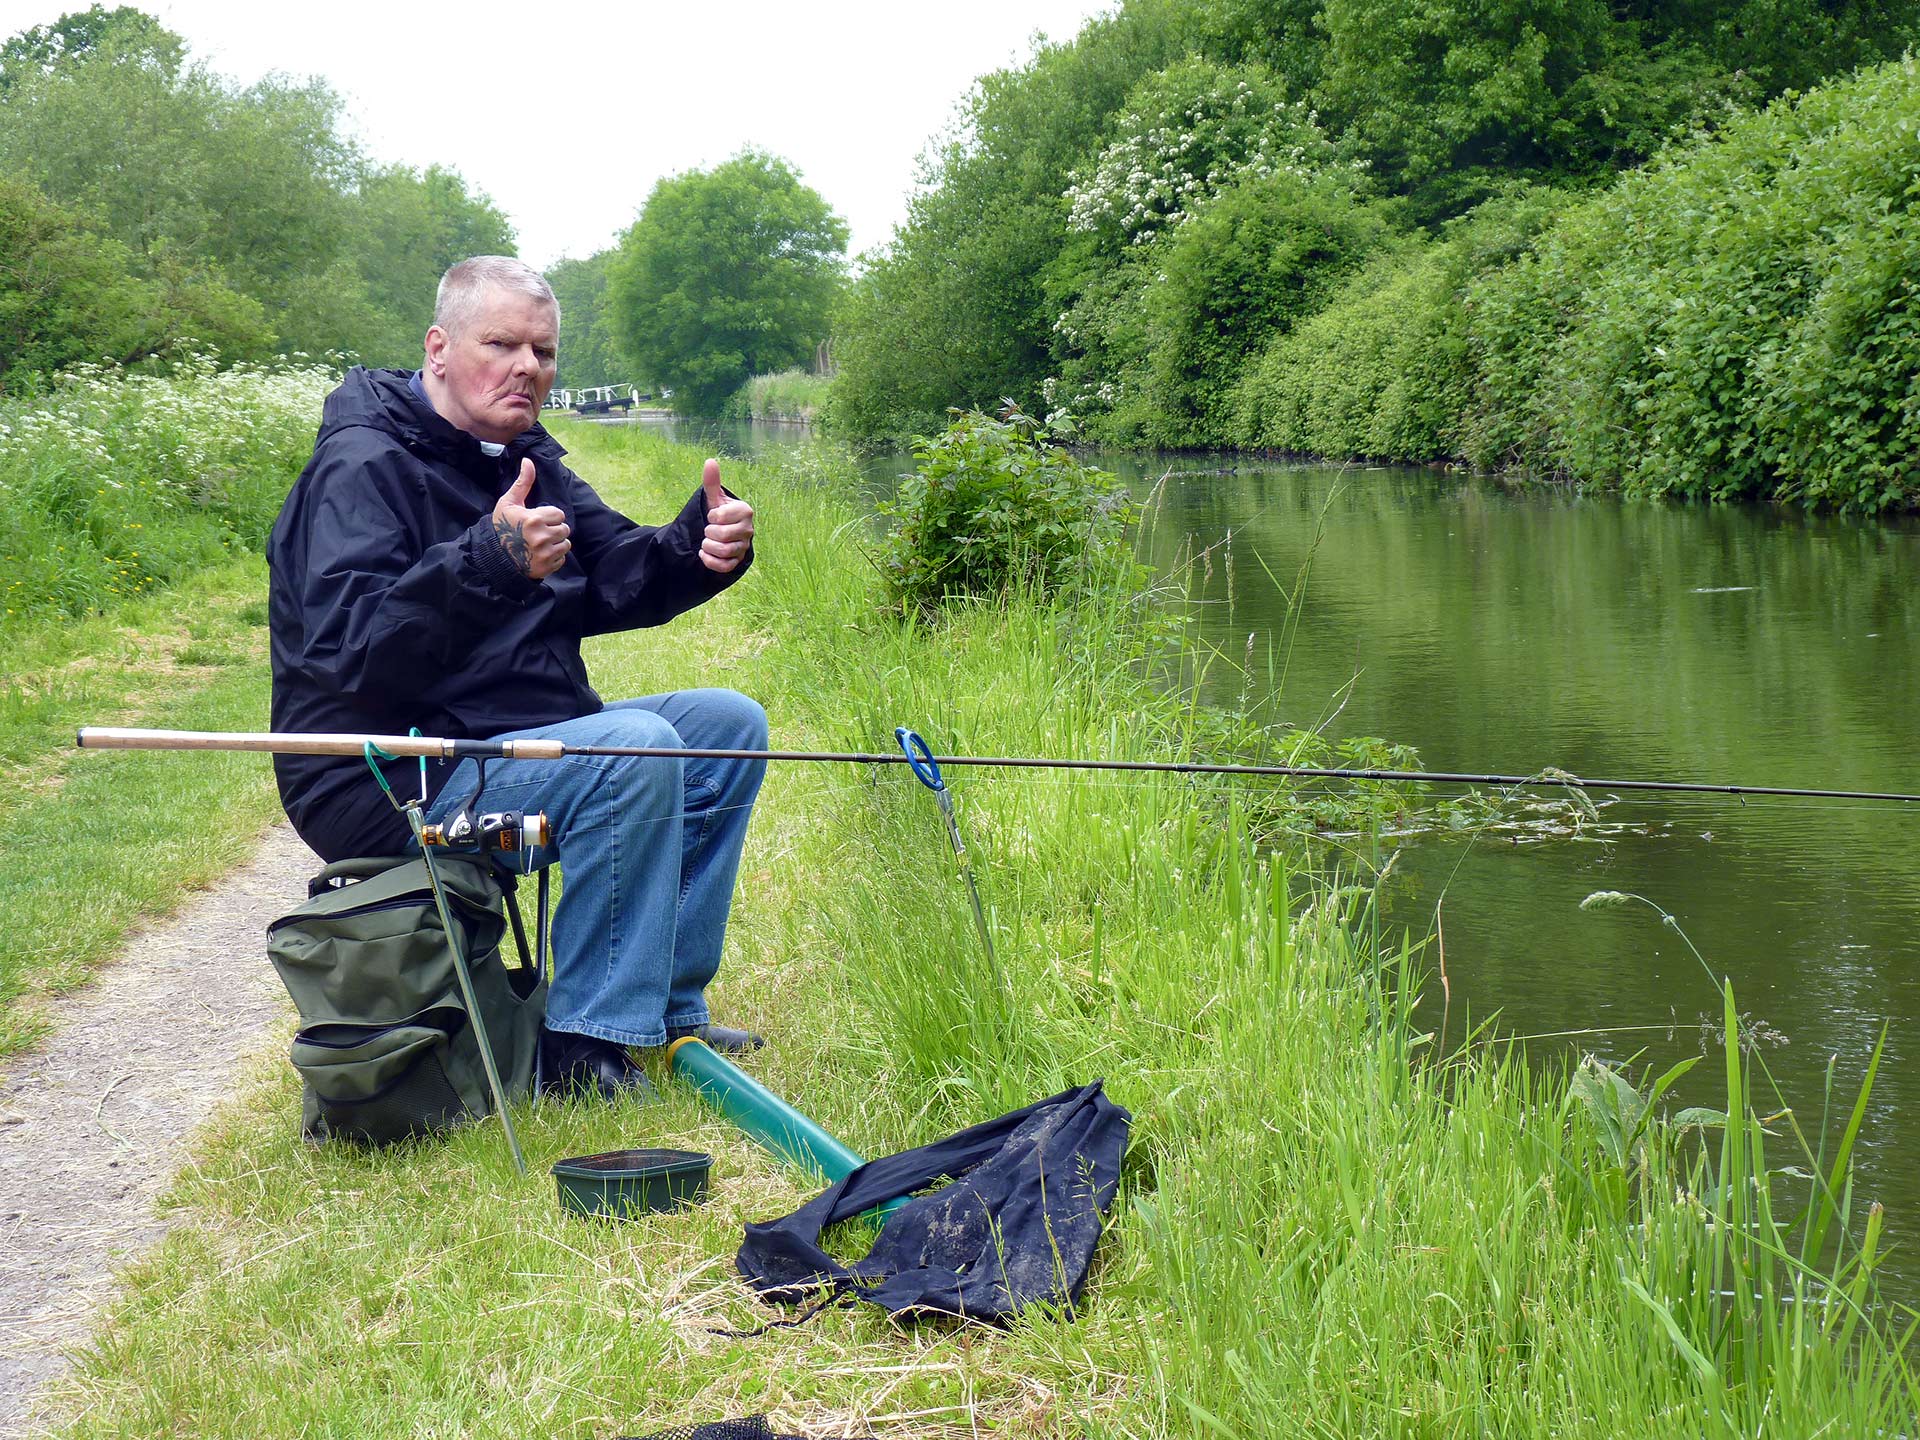 Fishing on the Aylesbury Canal